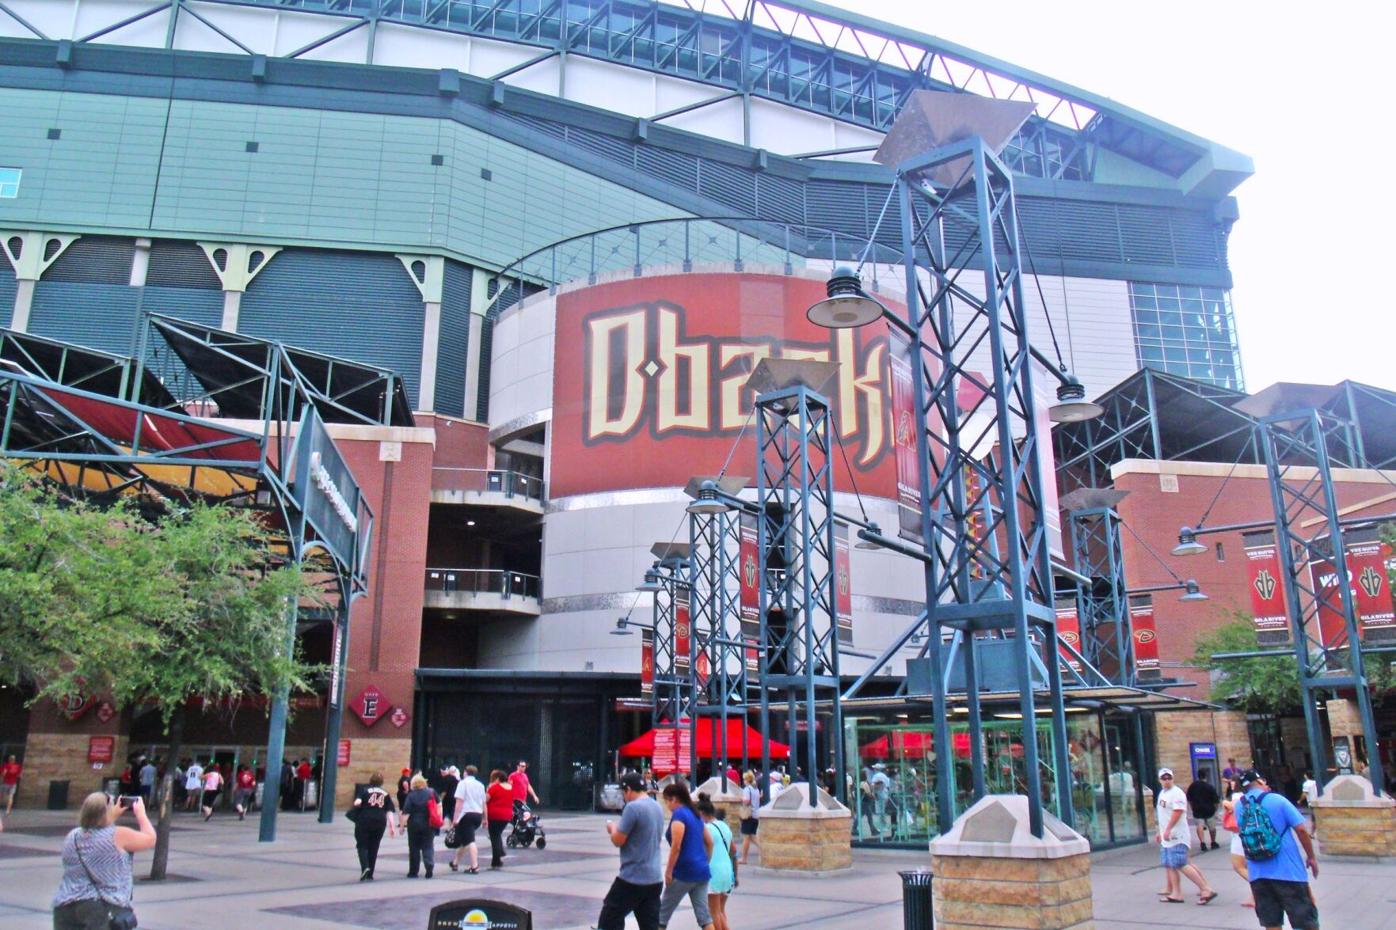 From the Dugout: Don't build a new ballpark, renovate Chase Field, Sports